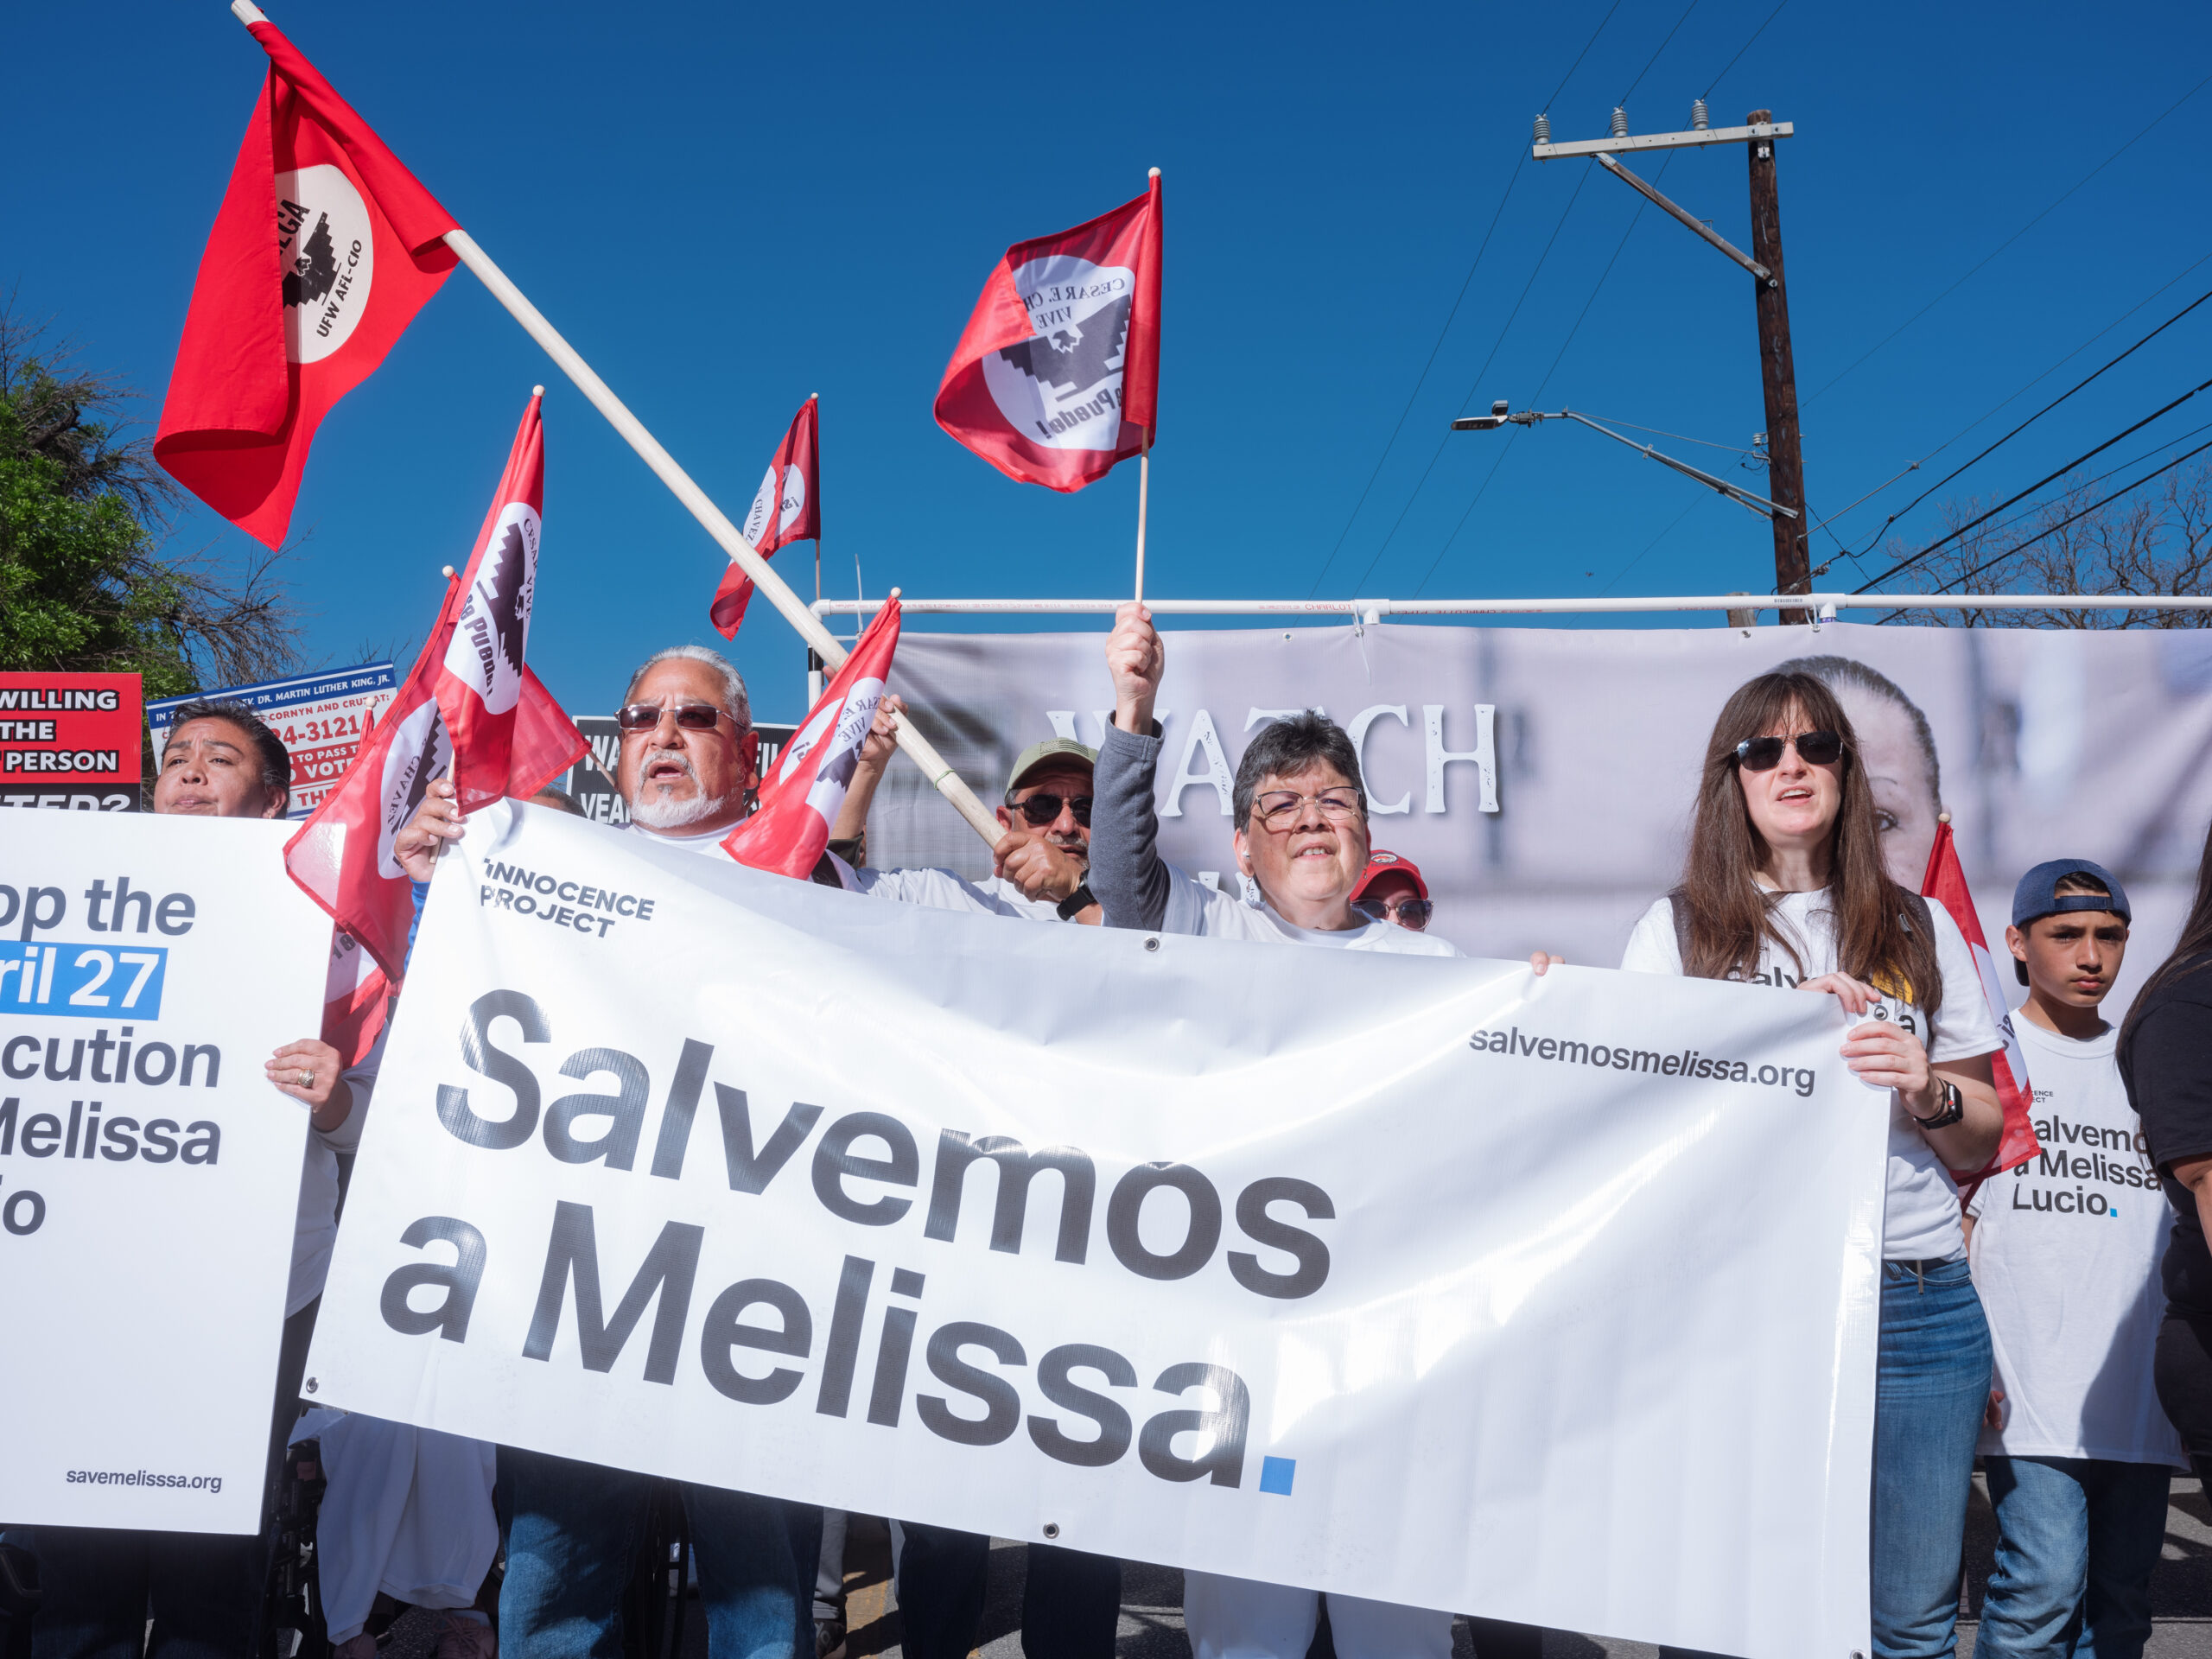 Advocates of Melissa Lucio were seen during the 26th annual Cesar E. Chavez March for Justice in San Antonio, Texas, on March 26, 2022. (Image: Christopher Lee for the Innocence Project)